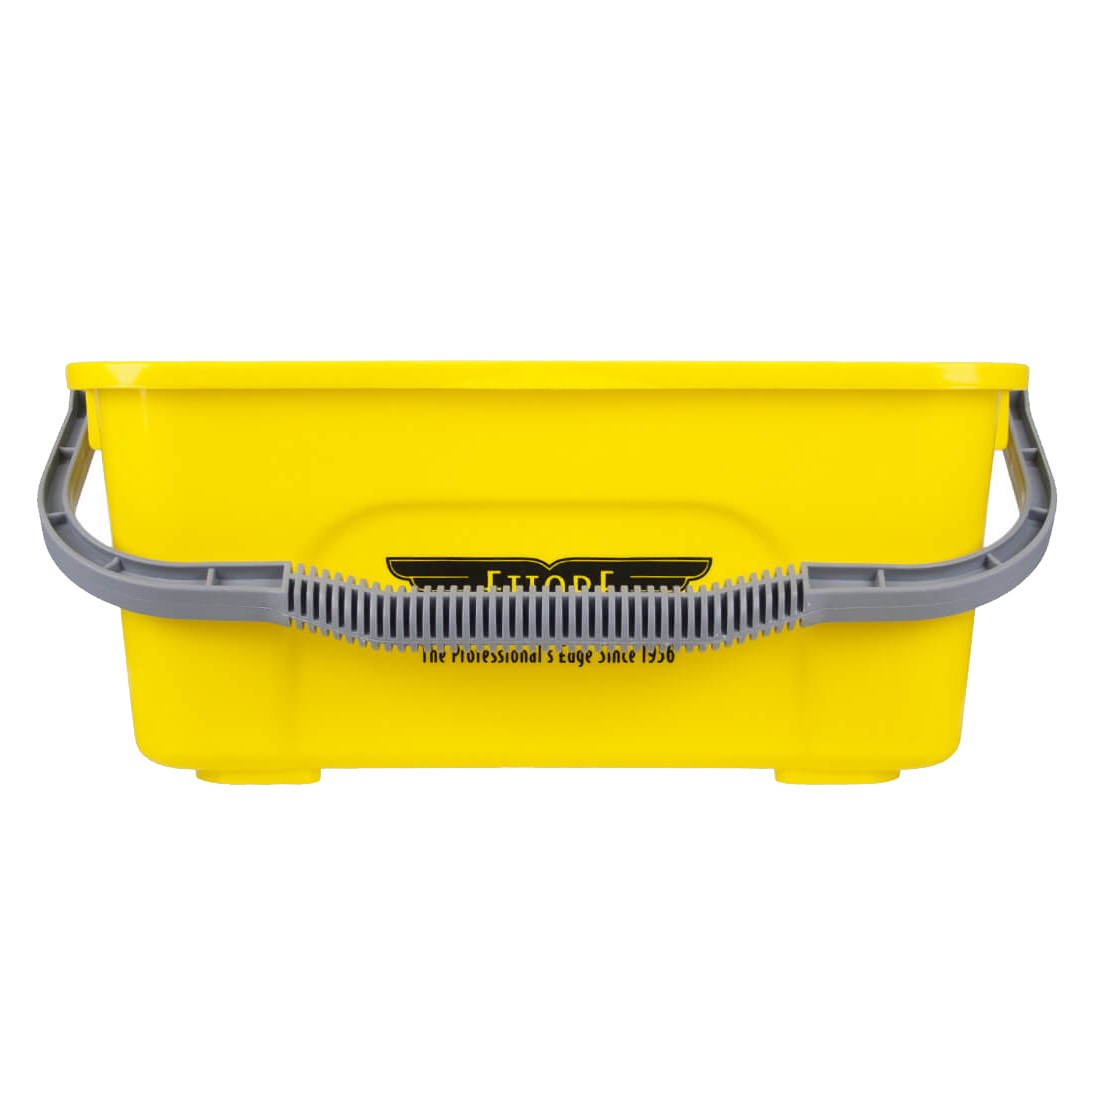 Lavex 6 Gallon Window Cleaning Bucket with Sieve